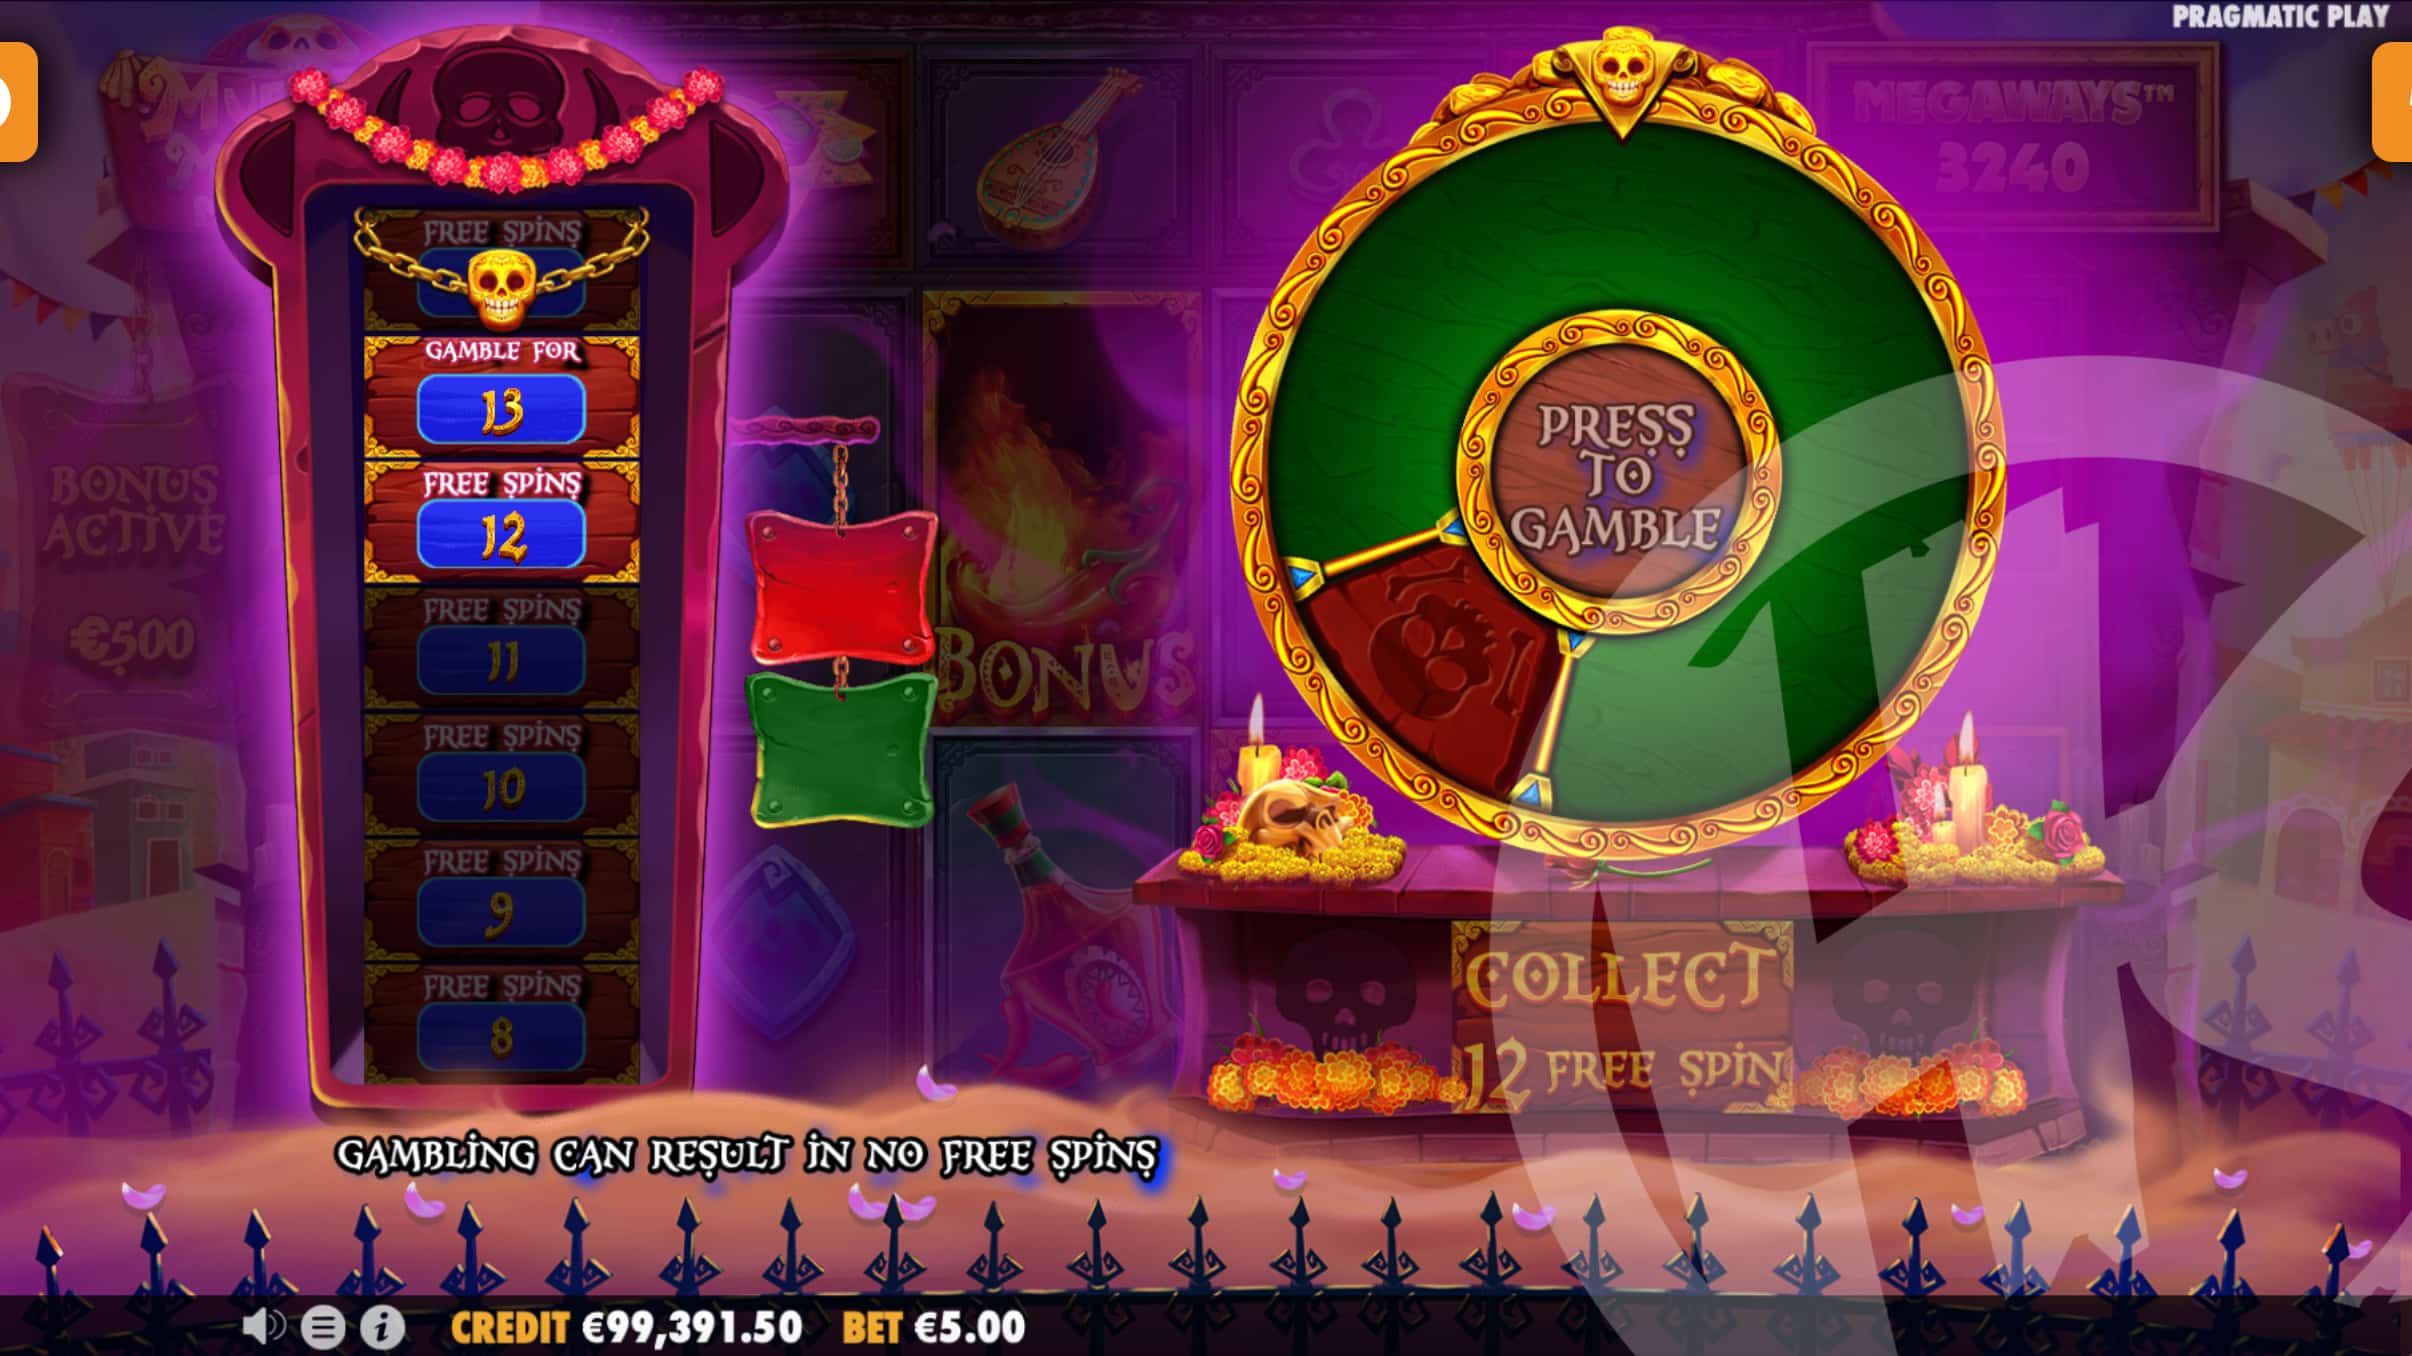 Gamble Up To 14 Free Spins